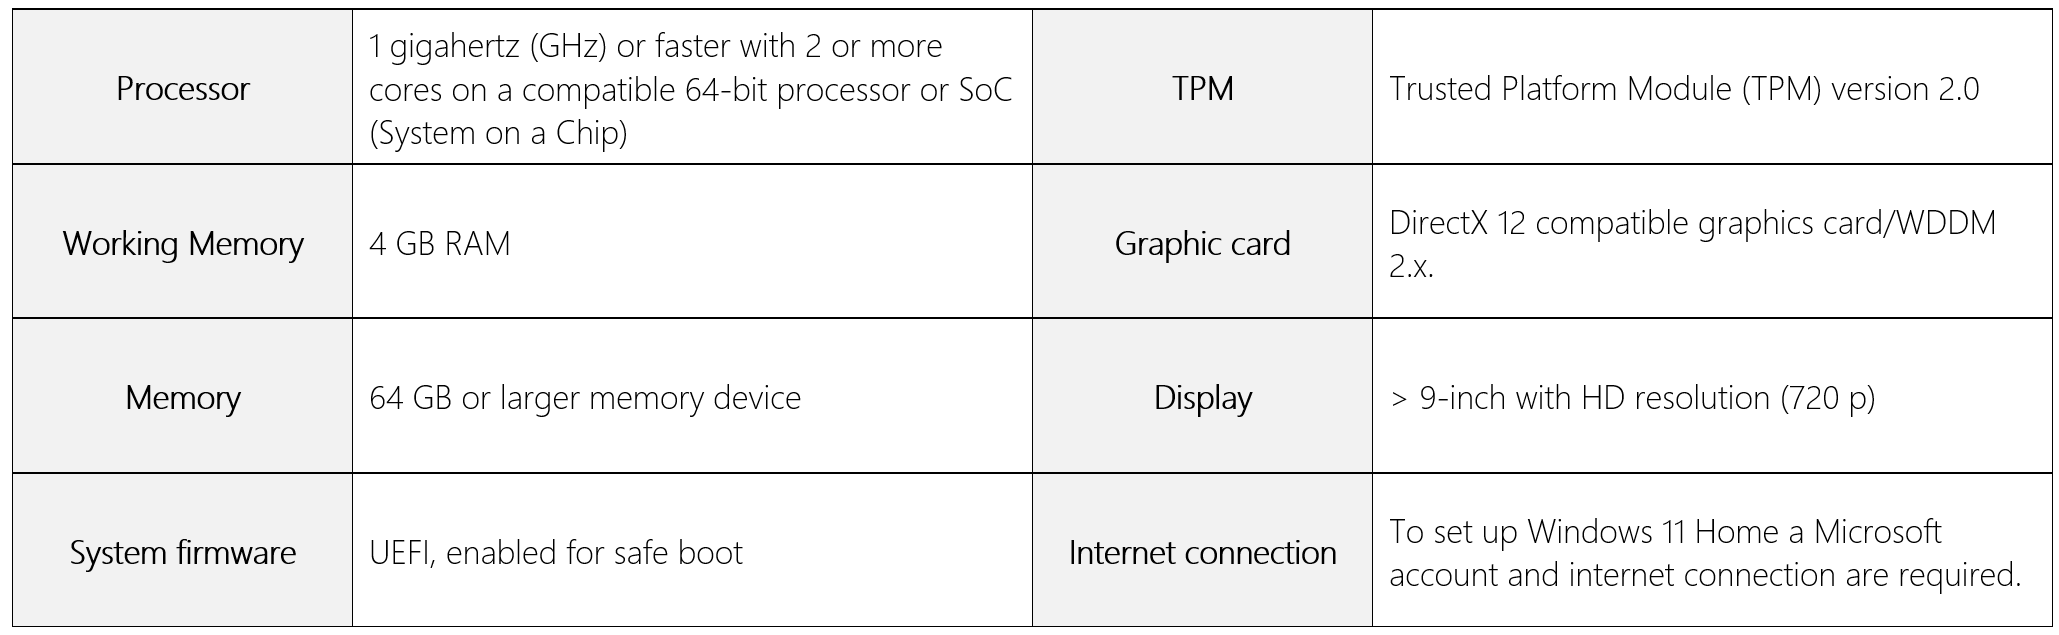 The table shows various minimum requirements for a device to be able to use Windows 11